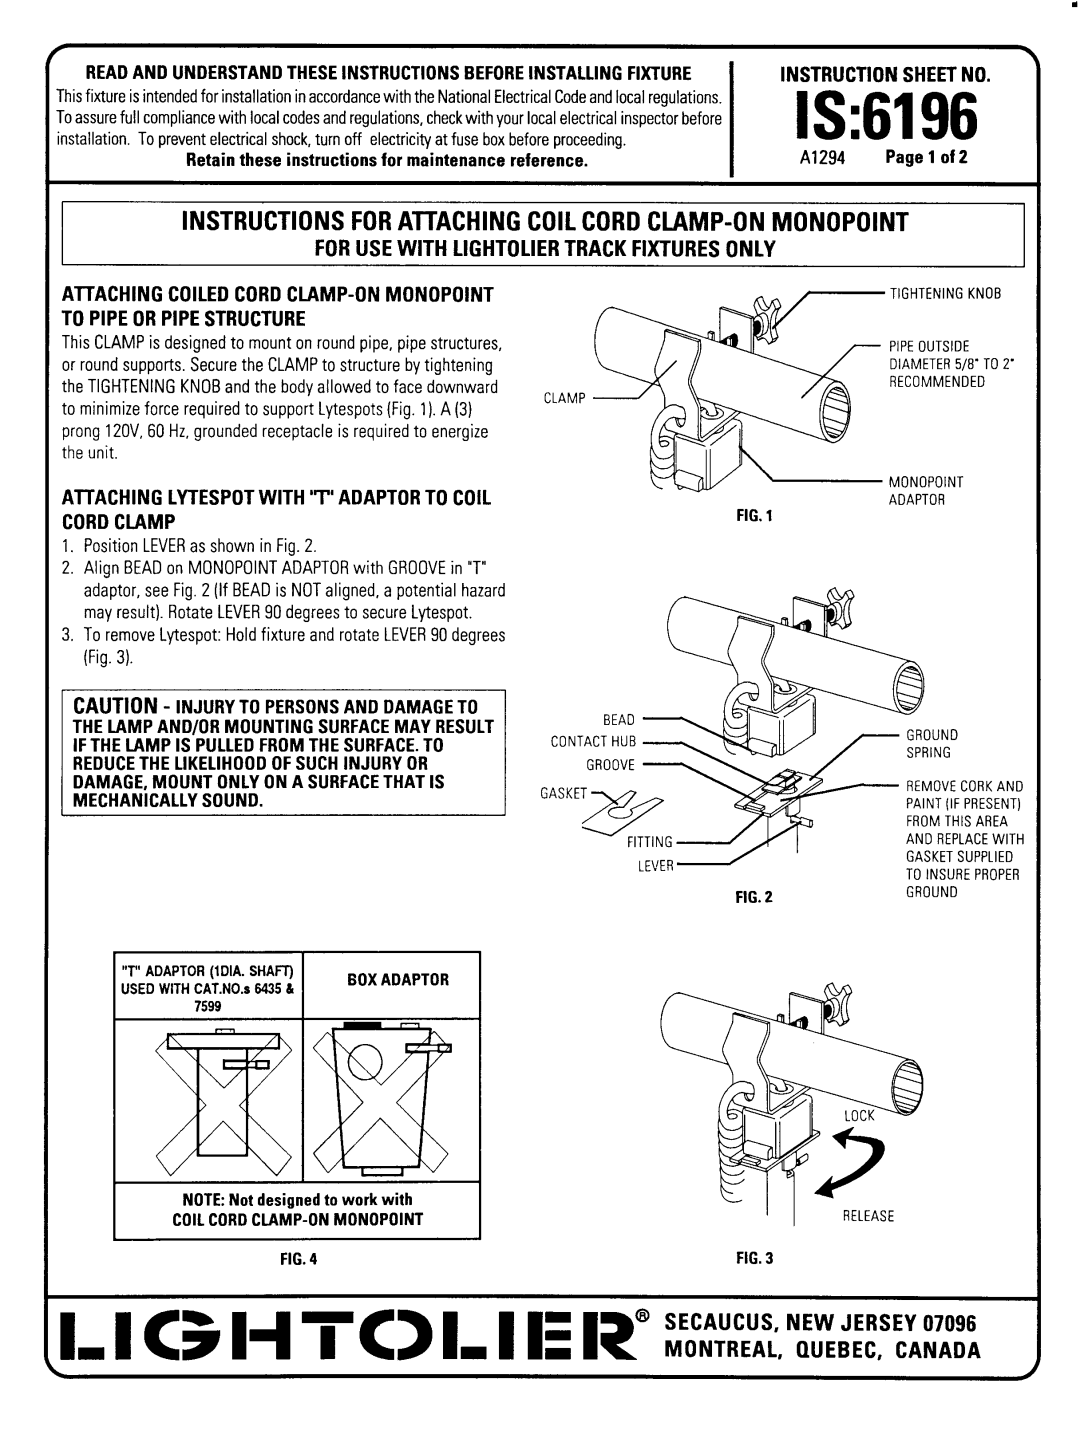 Lightolier 6196 instruction sheet 1-IC3H TC L IE R“E~~~~f~ ,N~~, For Use With Lightolier Track Fixtures Only, Is 